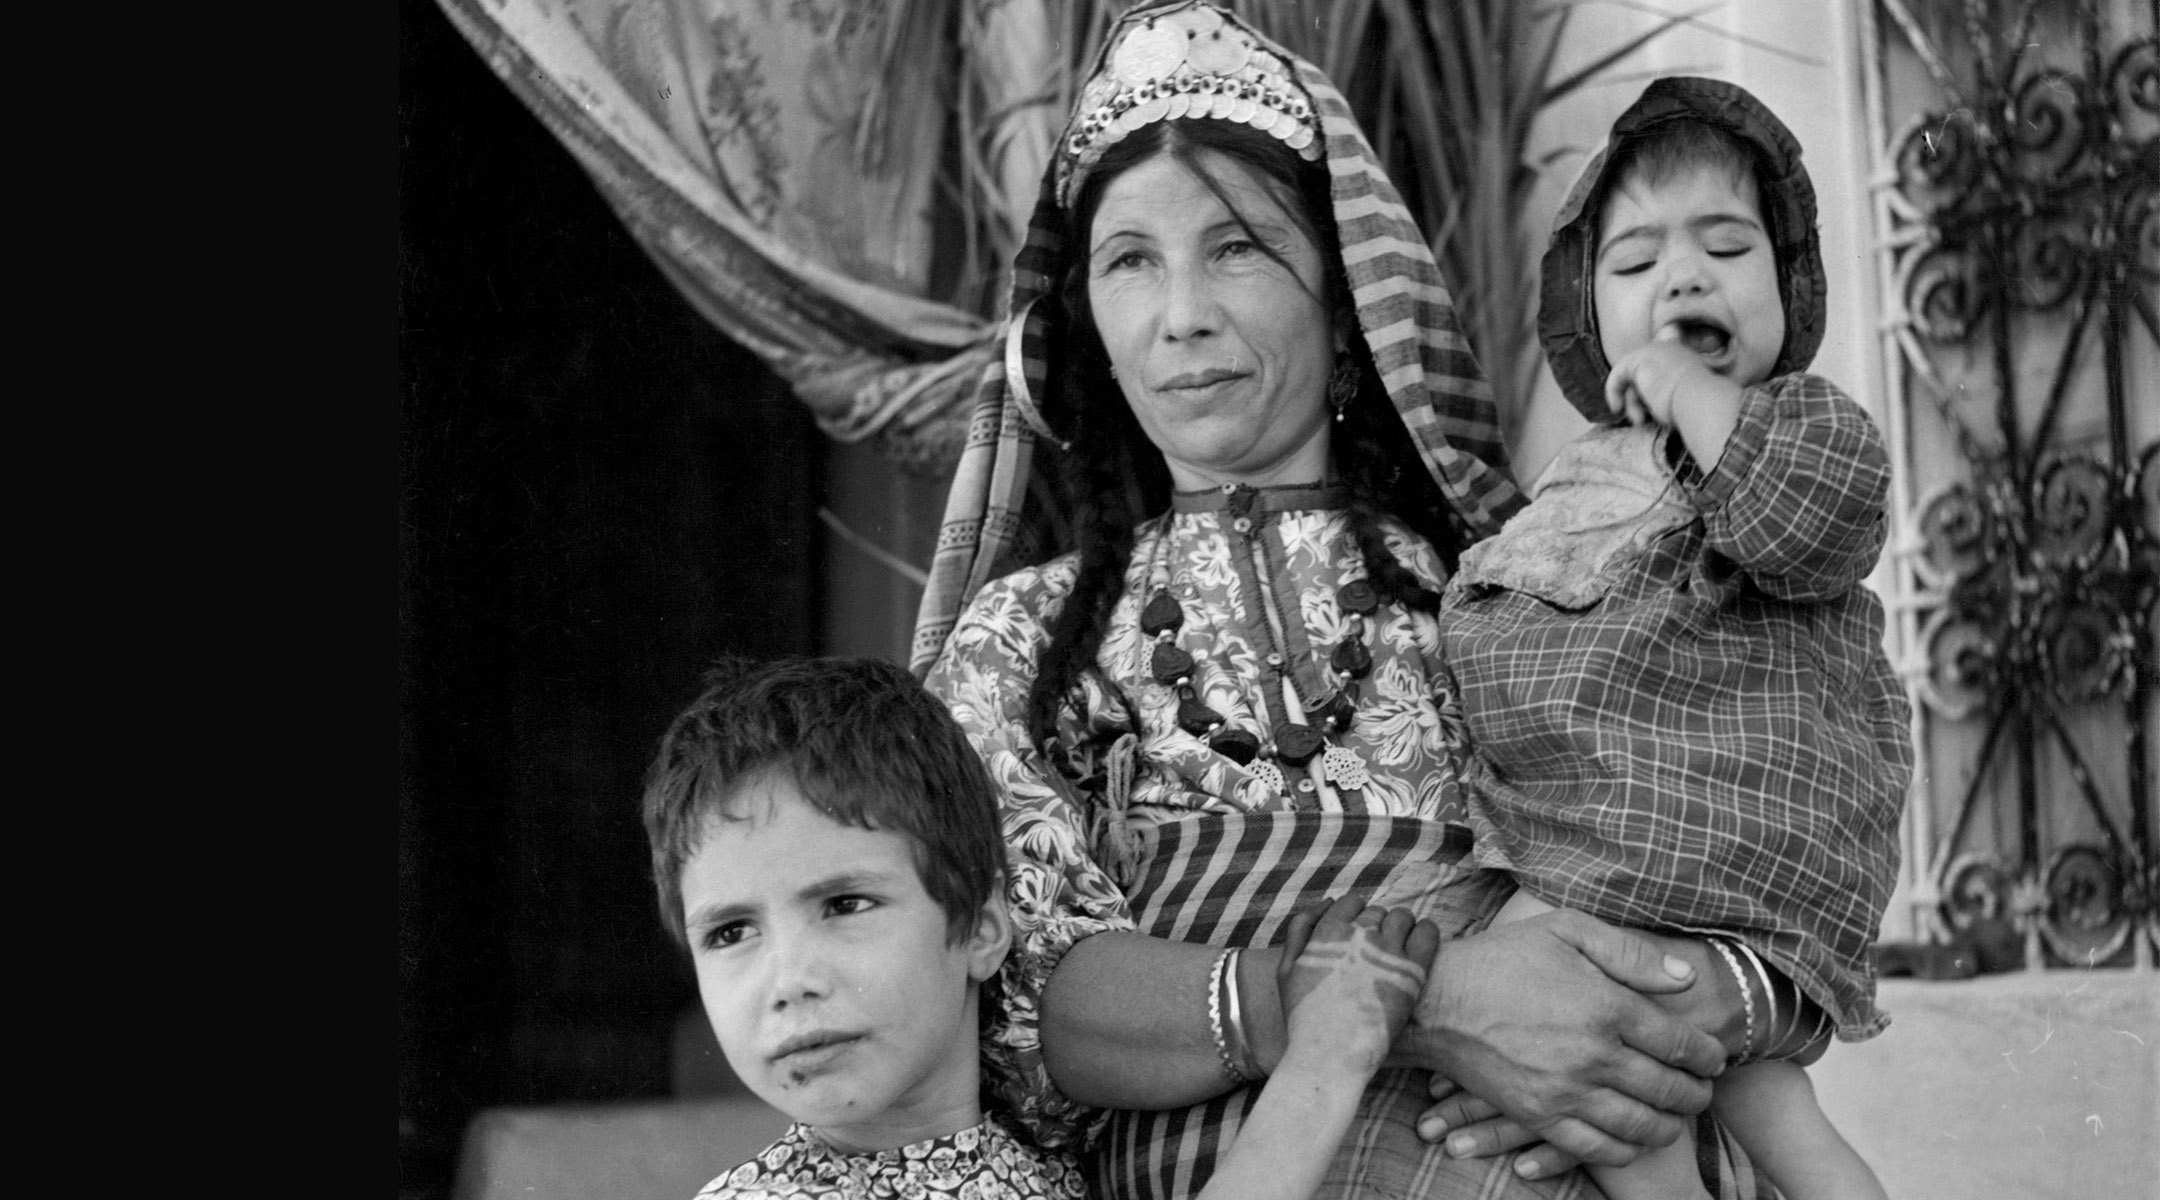 Young children, tired of the stifling atmosphere of the synagogue, come outside to be with their mother in Djerba, Tunisia. January 01, 1950. 850,000 refugees from Tunisia and other Arab countries were expelled after the creation of Israel. (Graphic House/Archive Photos/Getty Images)